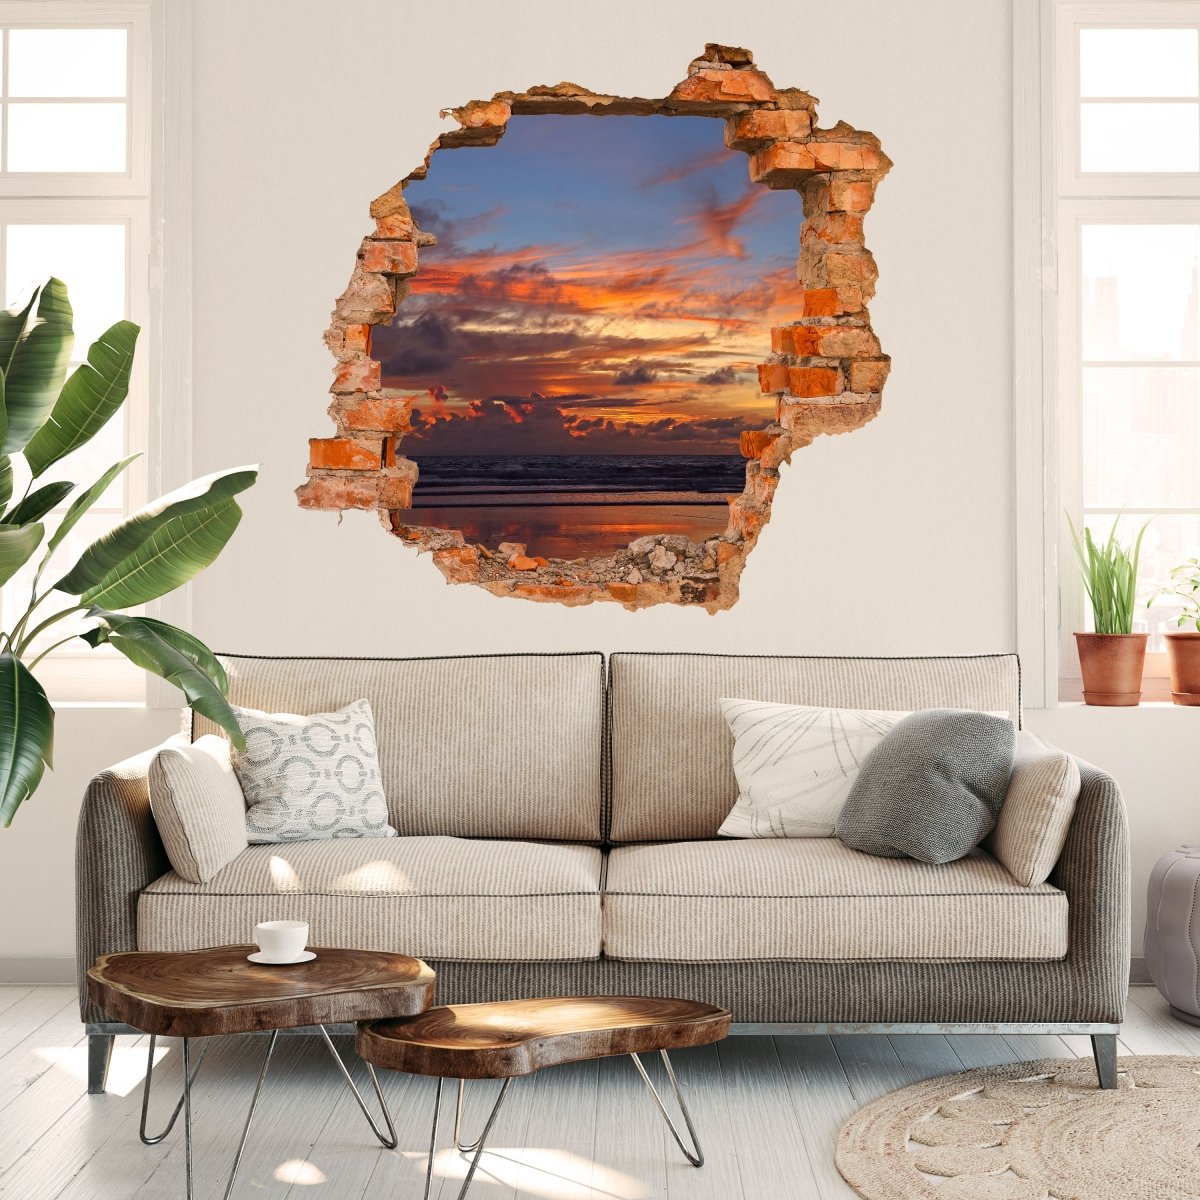 3D wall sticker sunset on the beach in Bali - Wall Decal M0907